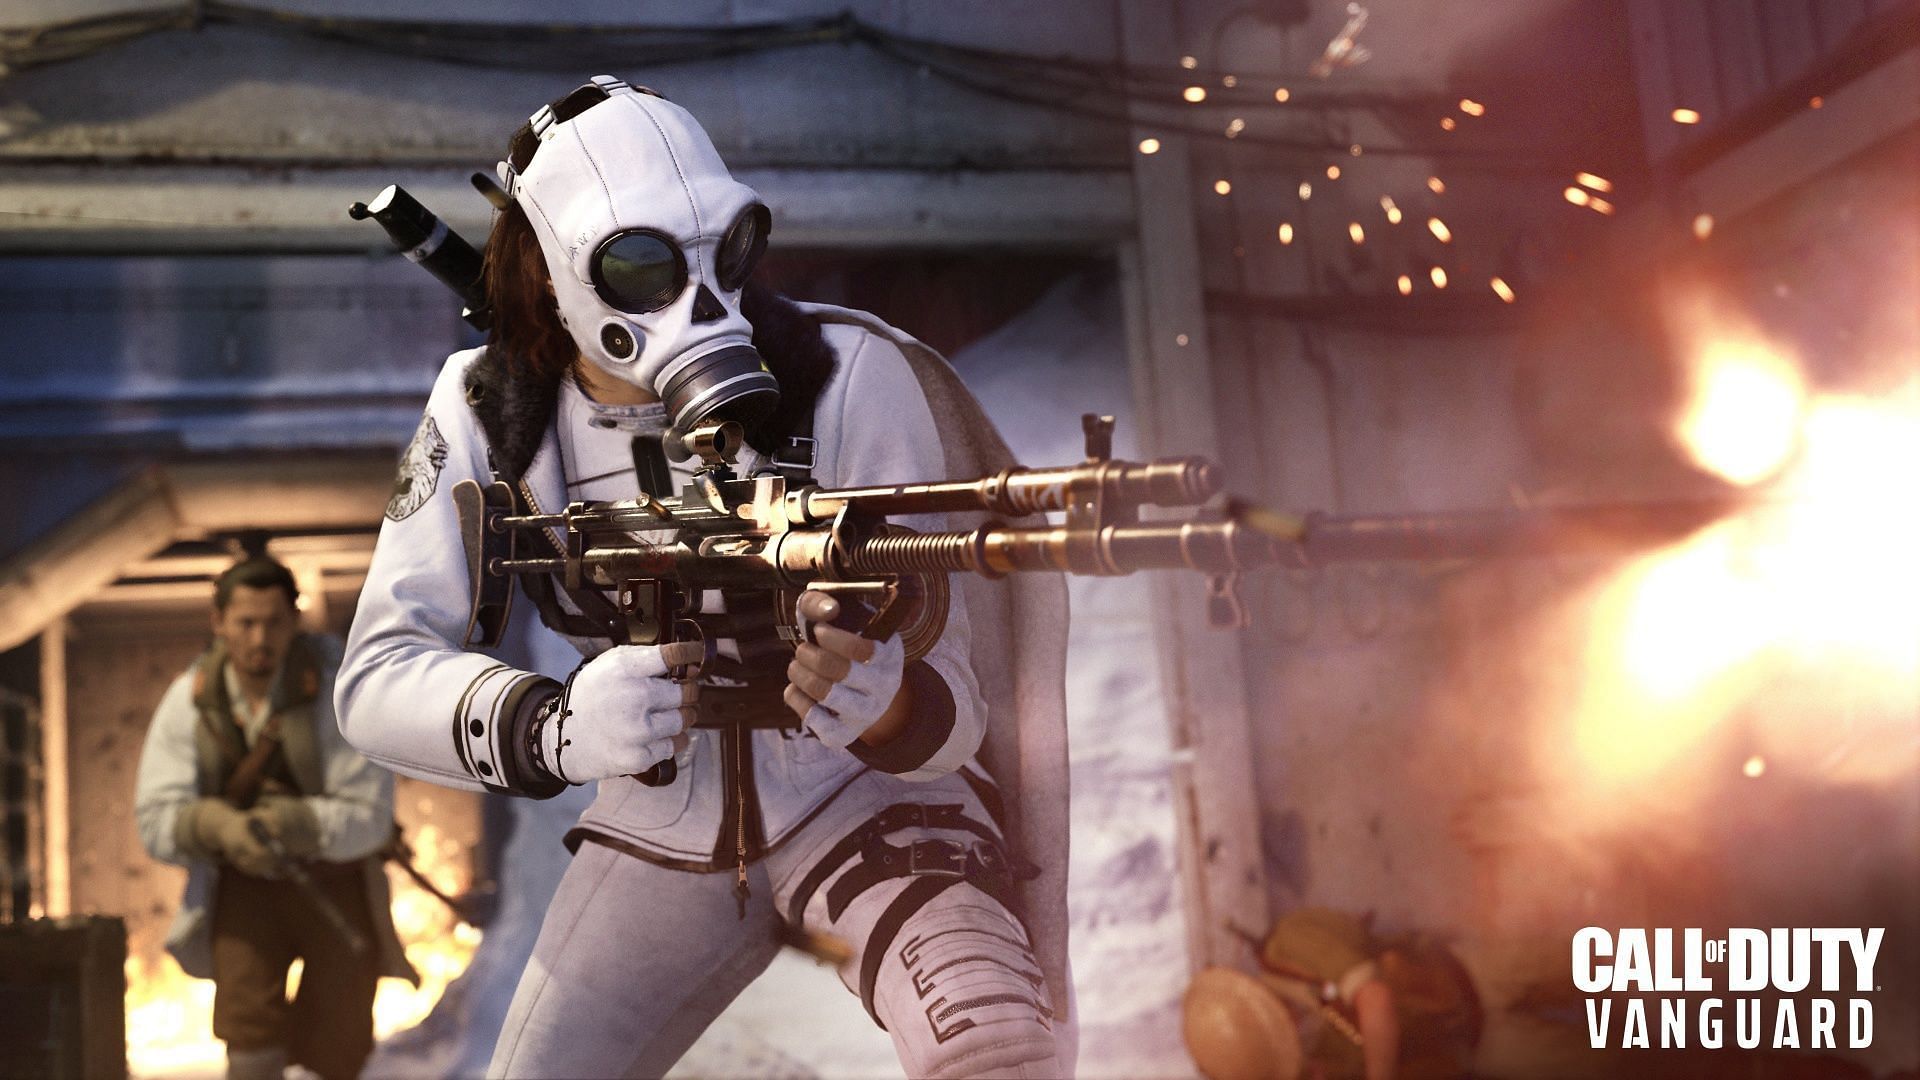 The KG M40 should become a fan favorite in Call of Duty: Warzone (Image via Activision)